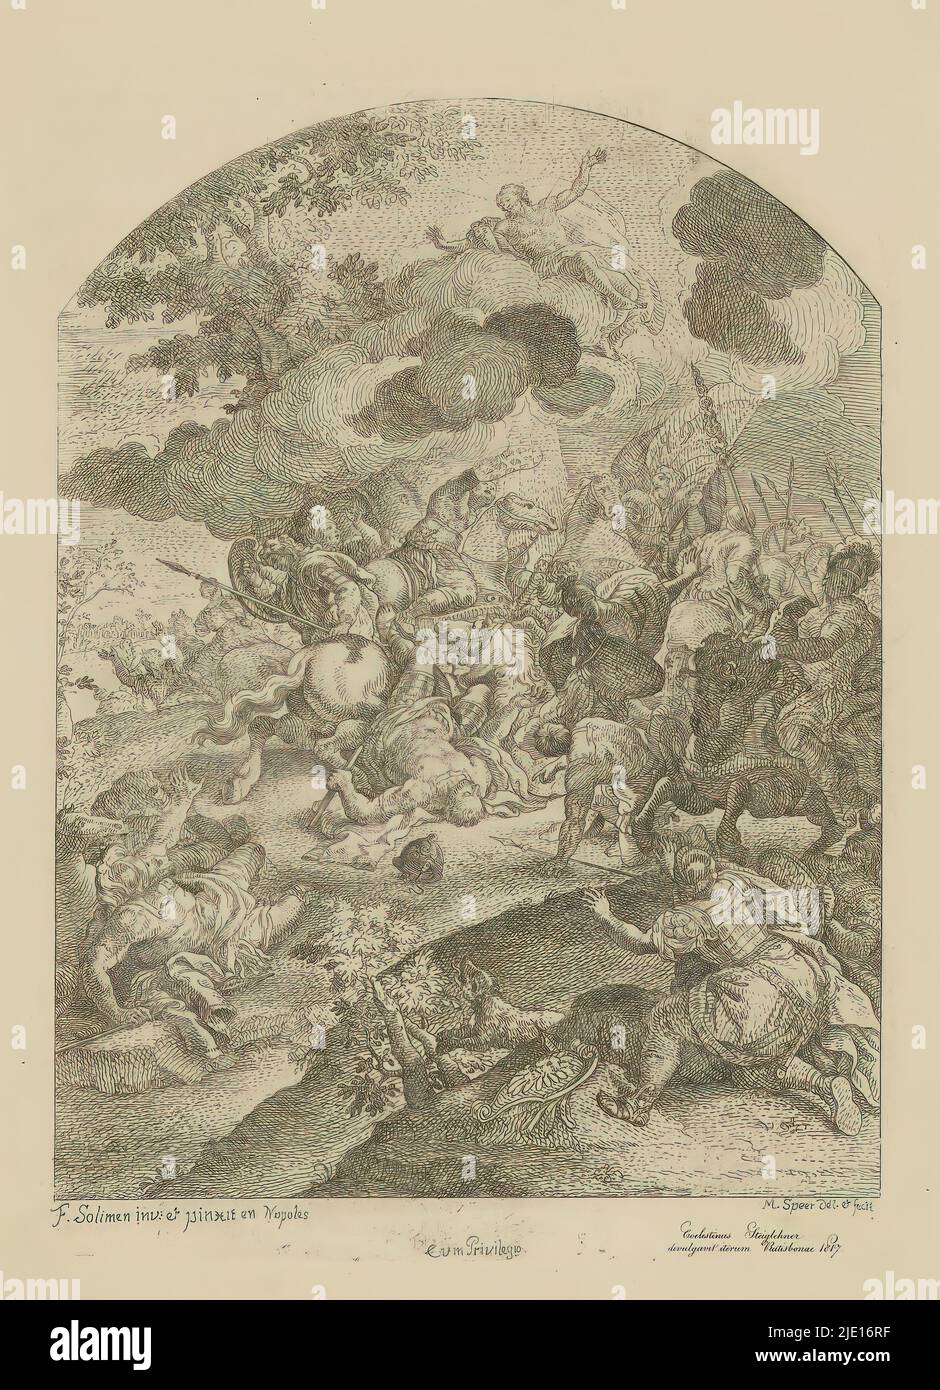 Battle scene with appearance of Christ, print maker: Martin Speer, (mentioned on object), after own design by: Martin Speer, (mentioned on object), after painting by: Francesco Solimena, (mentioned on object), print maker: Regensburg, after painting by: Naples, publisher: Regensburg, 1817, paper, etching, height 342 mm × width 251 mm Stock Photo